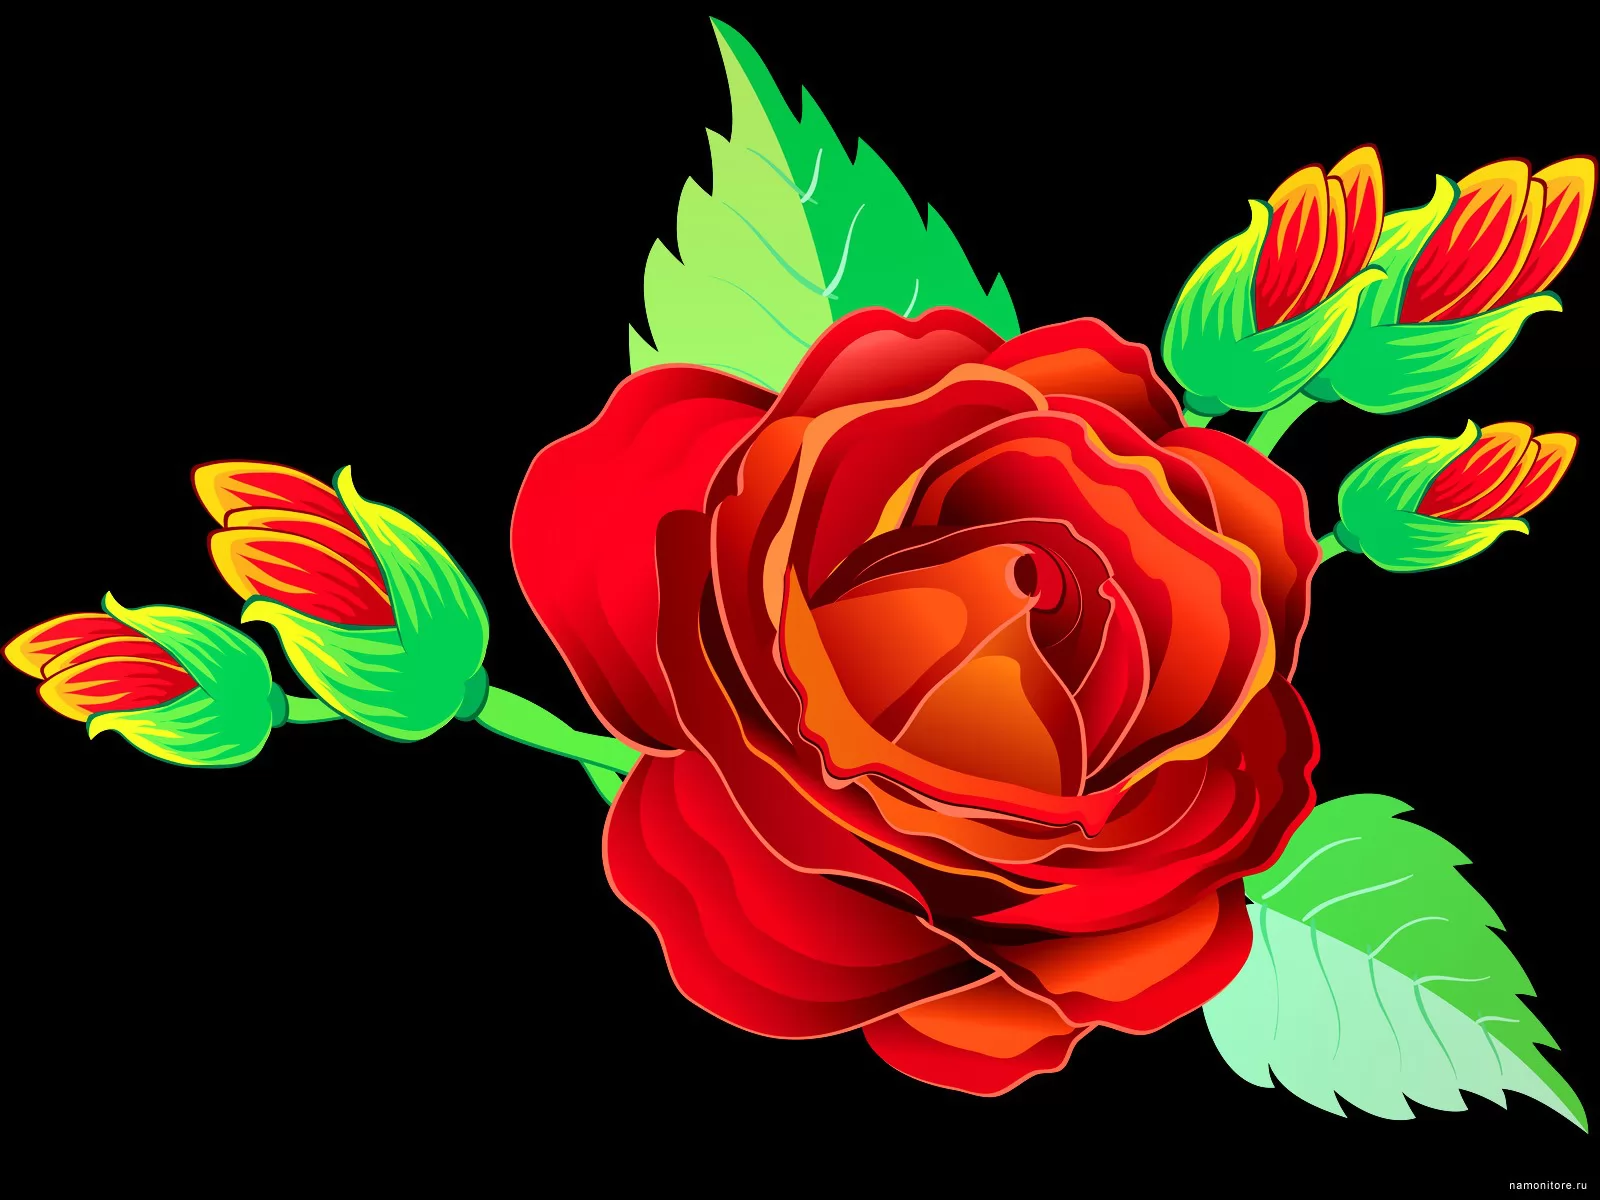 Rose, black, drawed, flowers, red, roses x